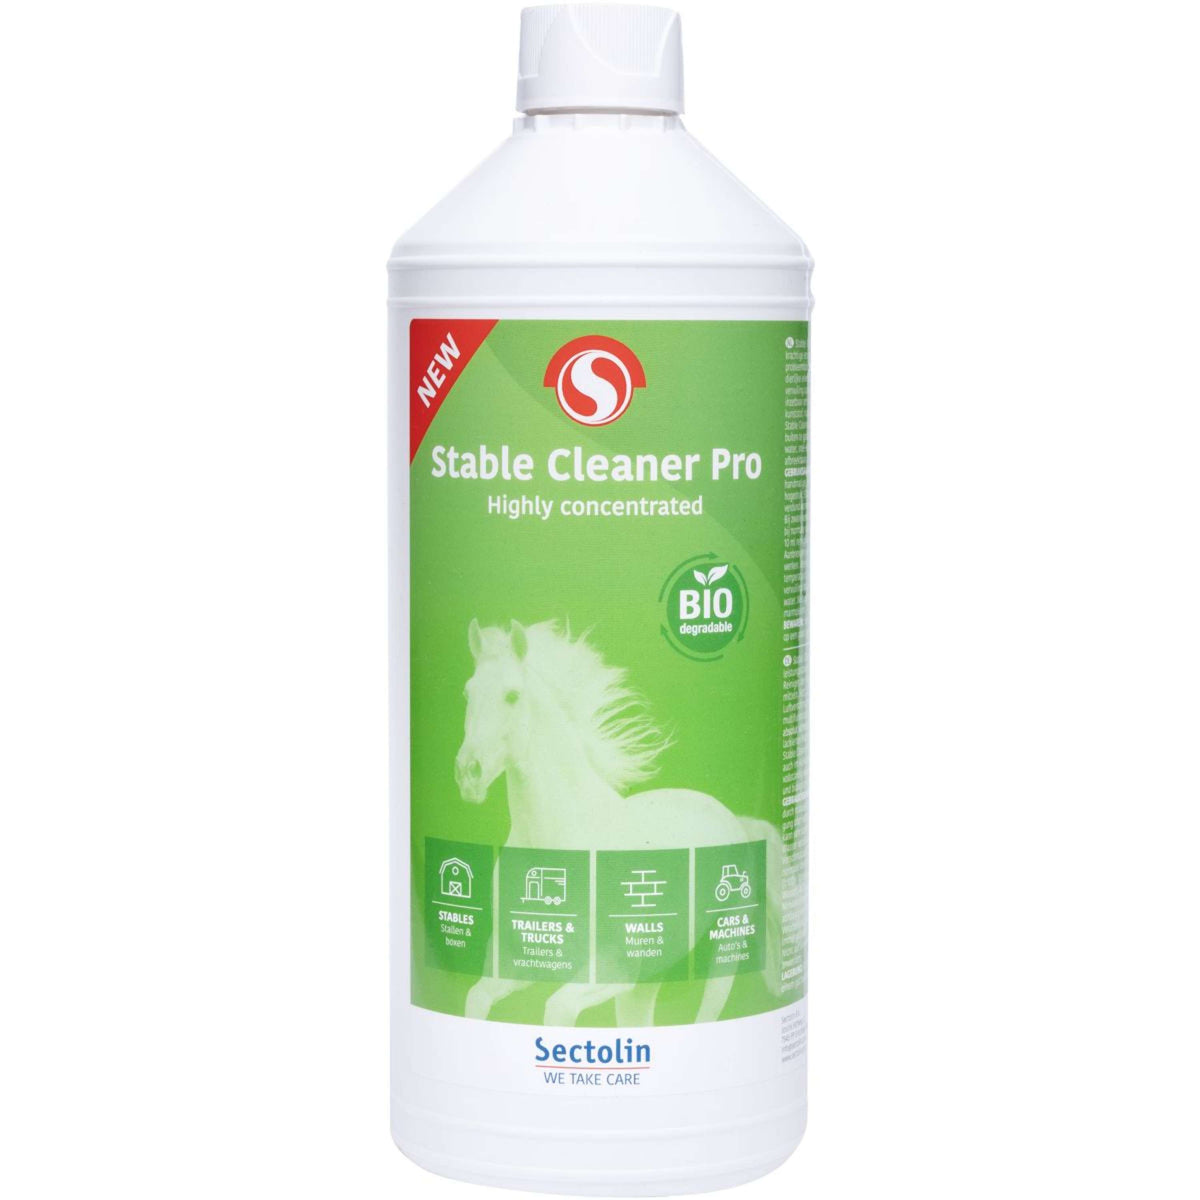 Sectolin Stable Cleaner Pro